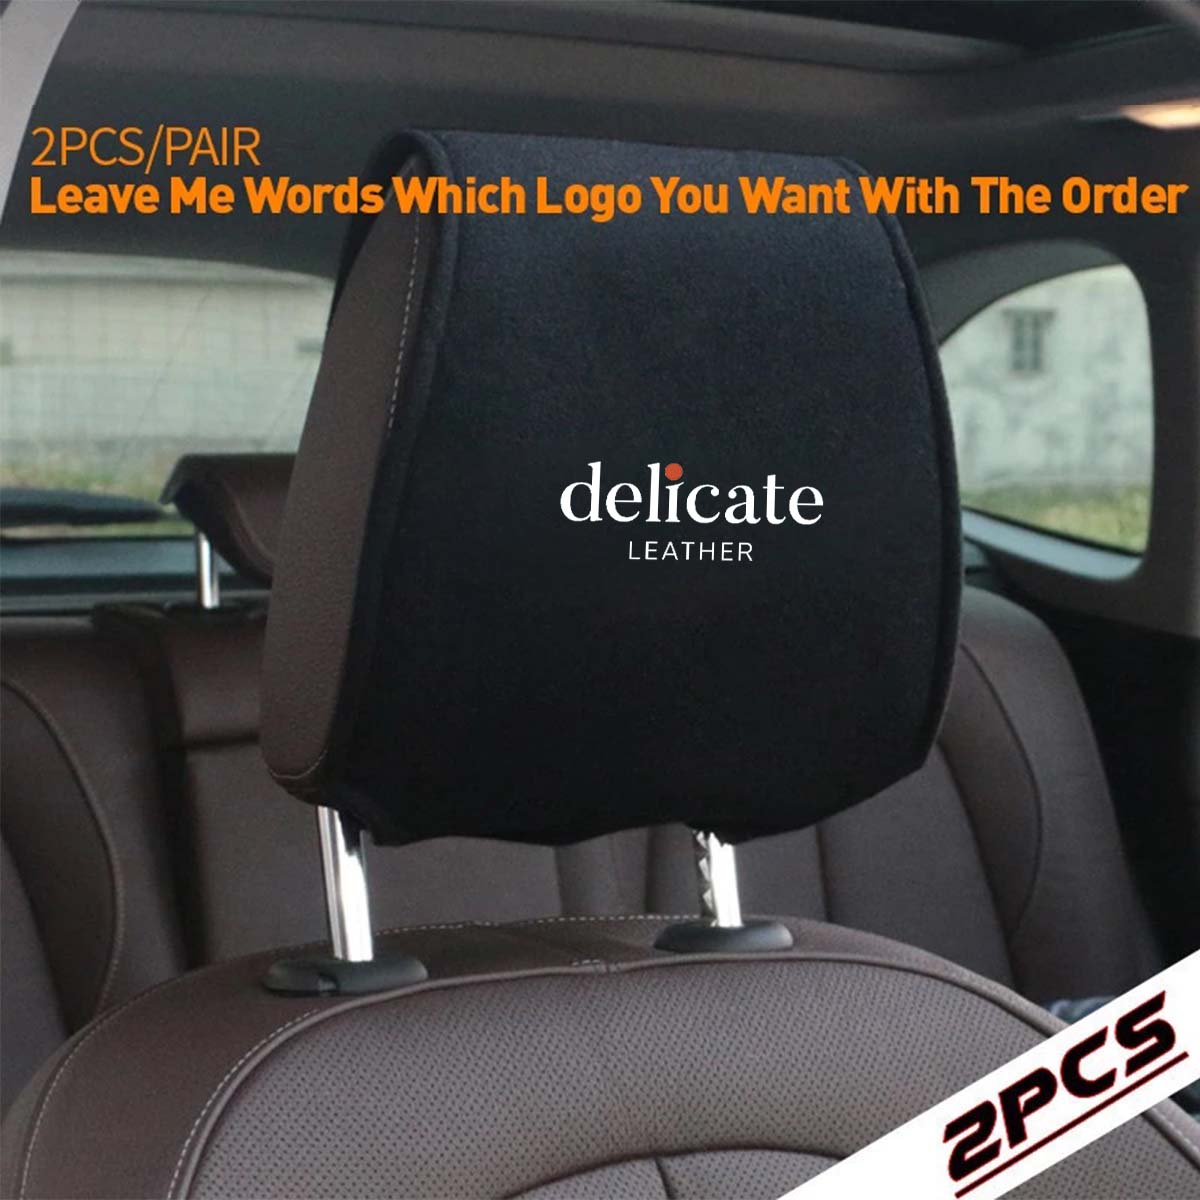 Delicate Leather Car Seat Headrest Cover Breathable Flexible Headrest Covers Velcro Auto Headrest Covers Universal Fit, Custom For Your Cars, Car Accessories PE13998 - Delicate Leather